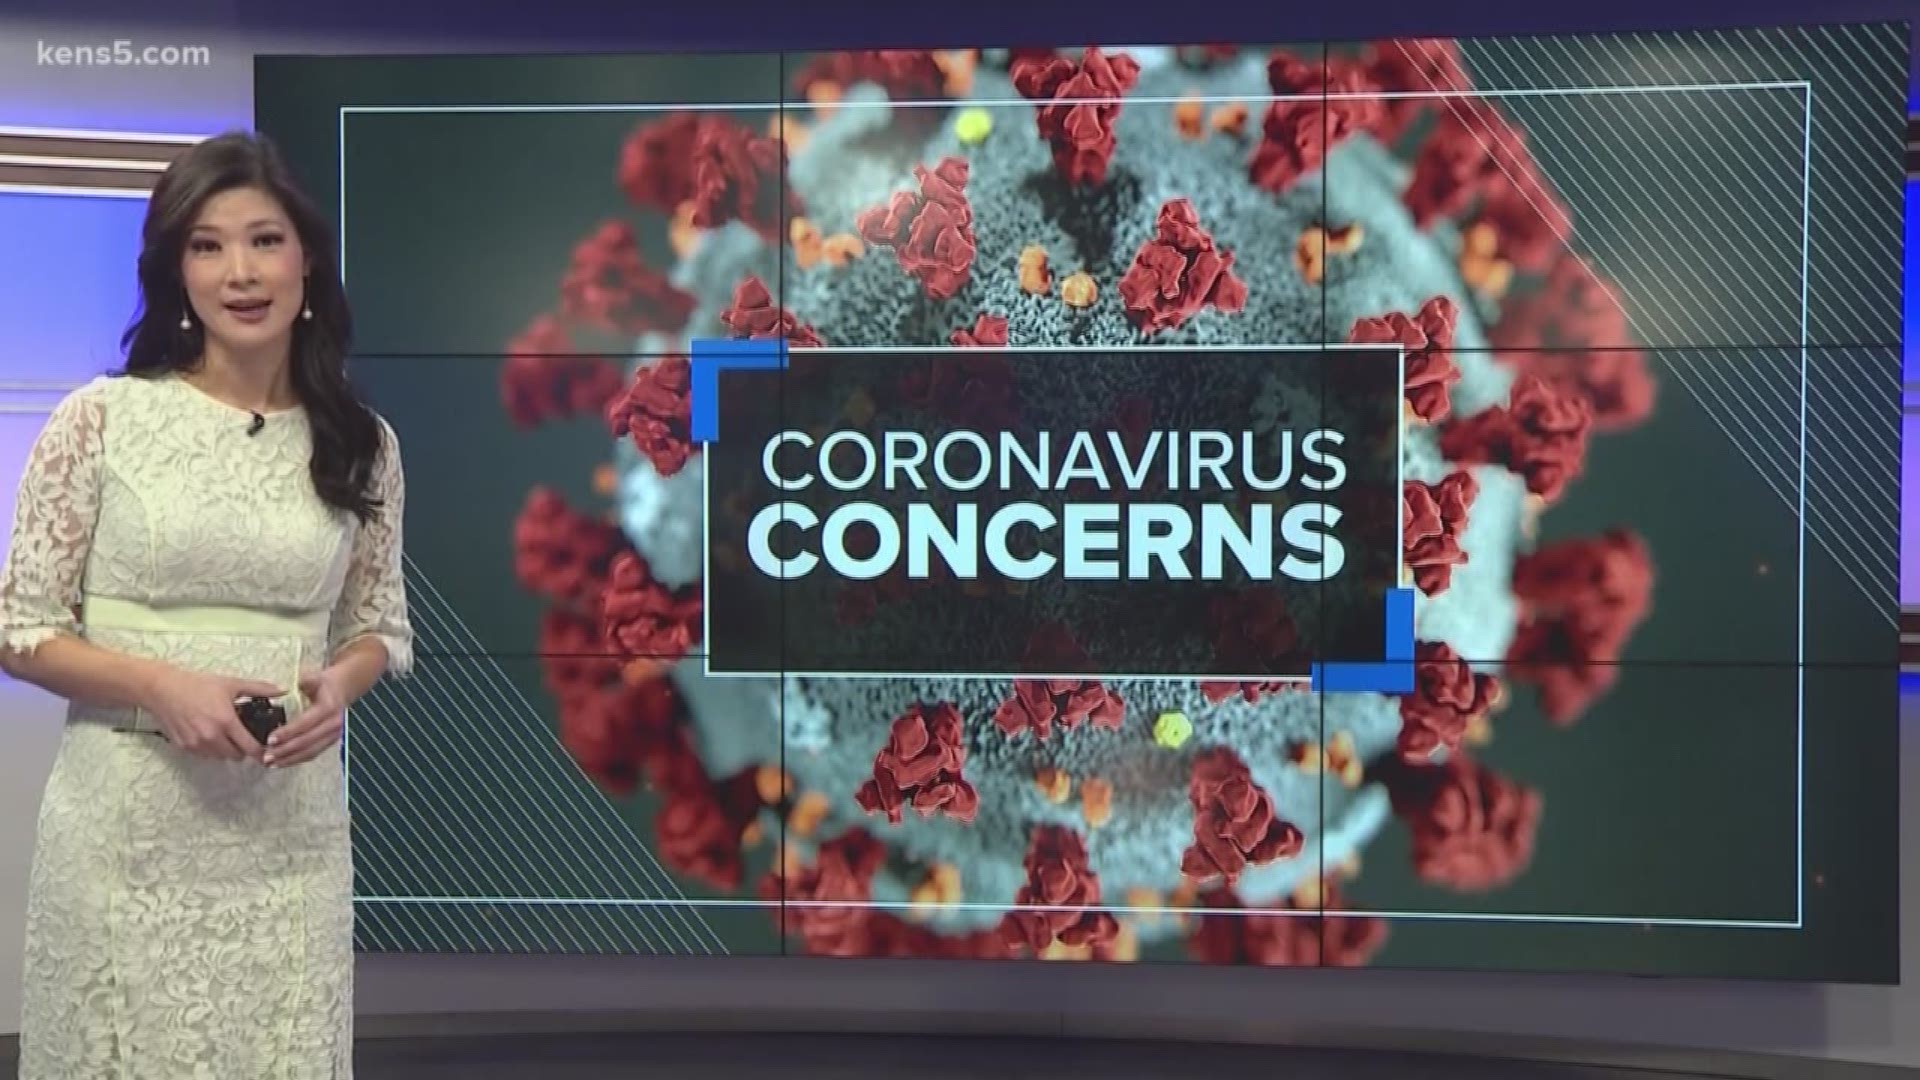 The Centers for Disease Control and Prevention are taking new measure to contain the disease.